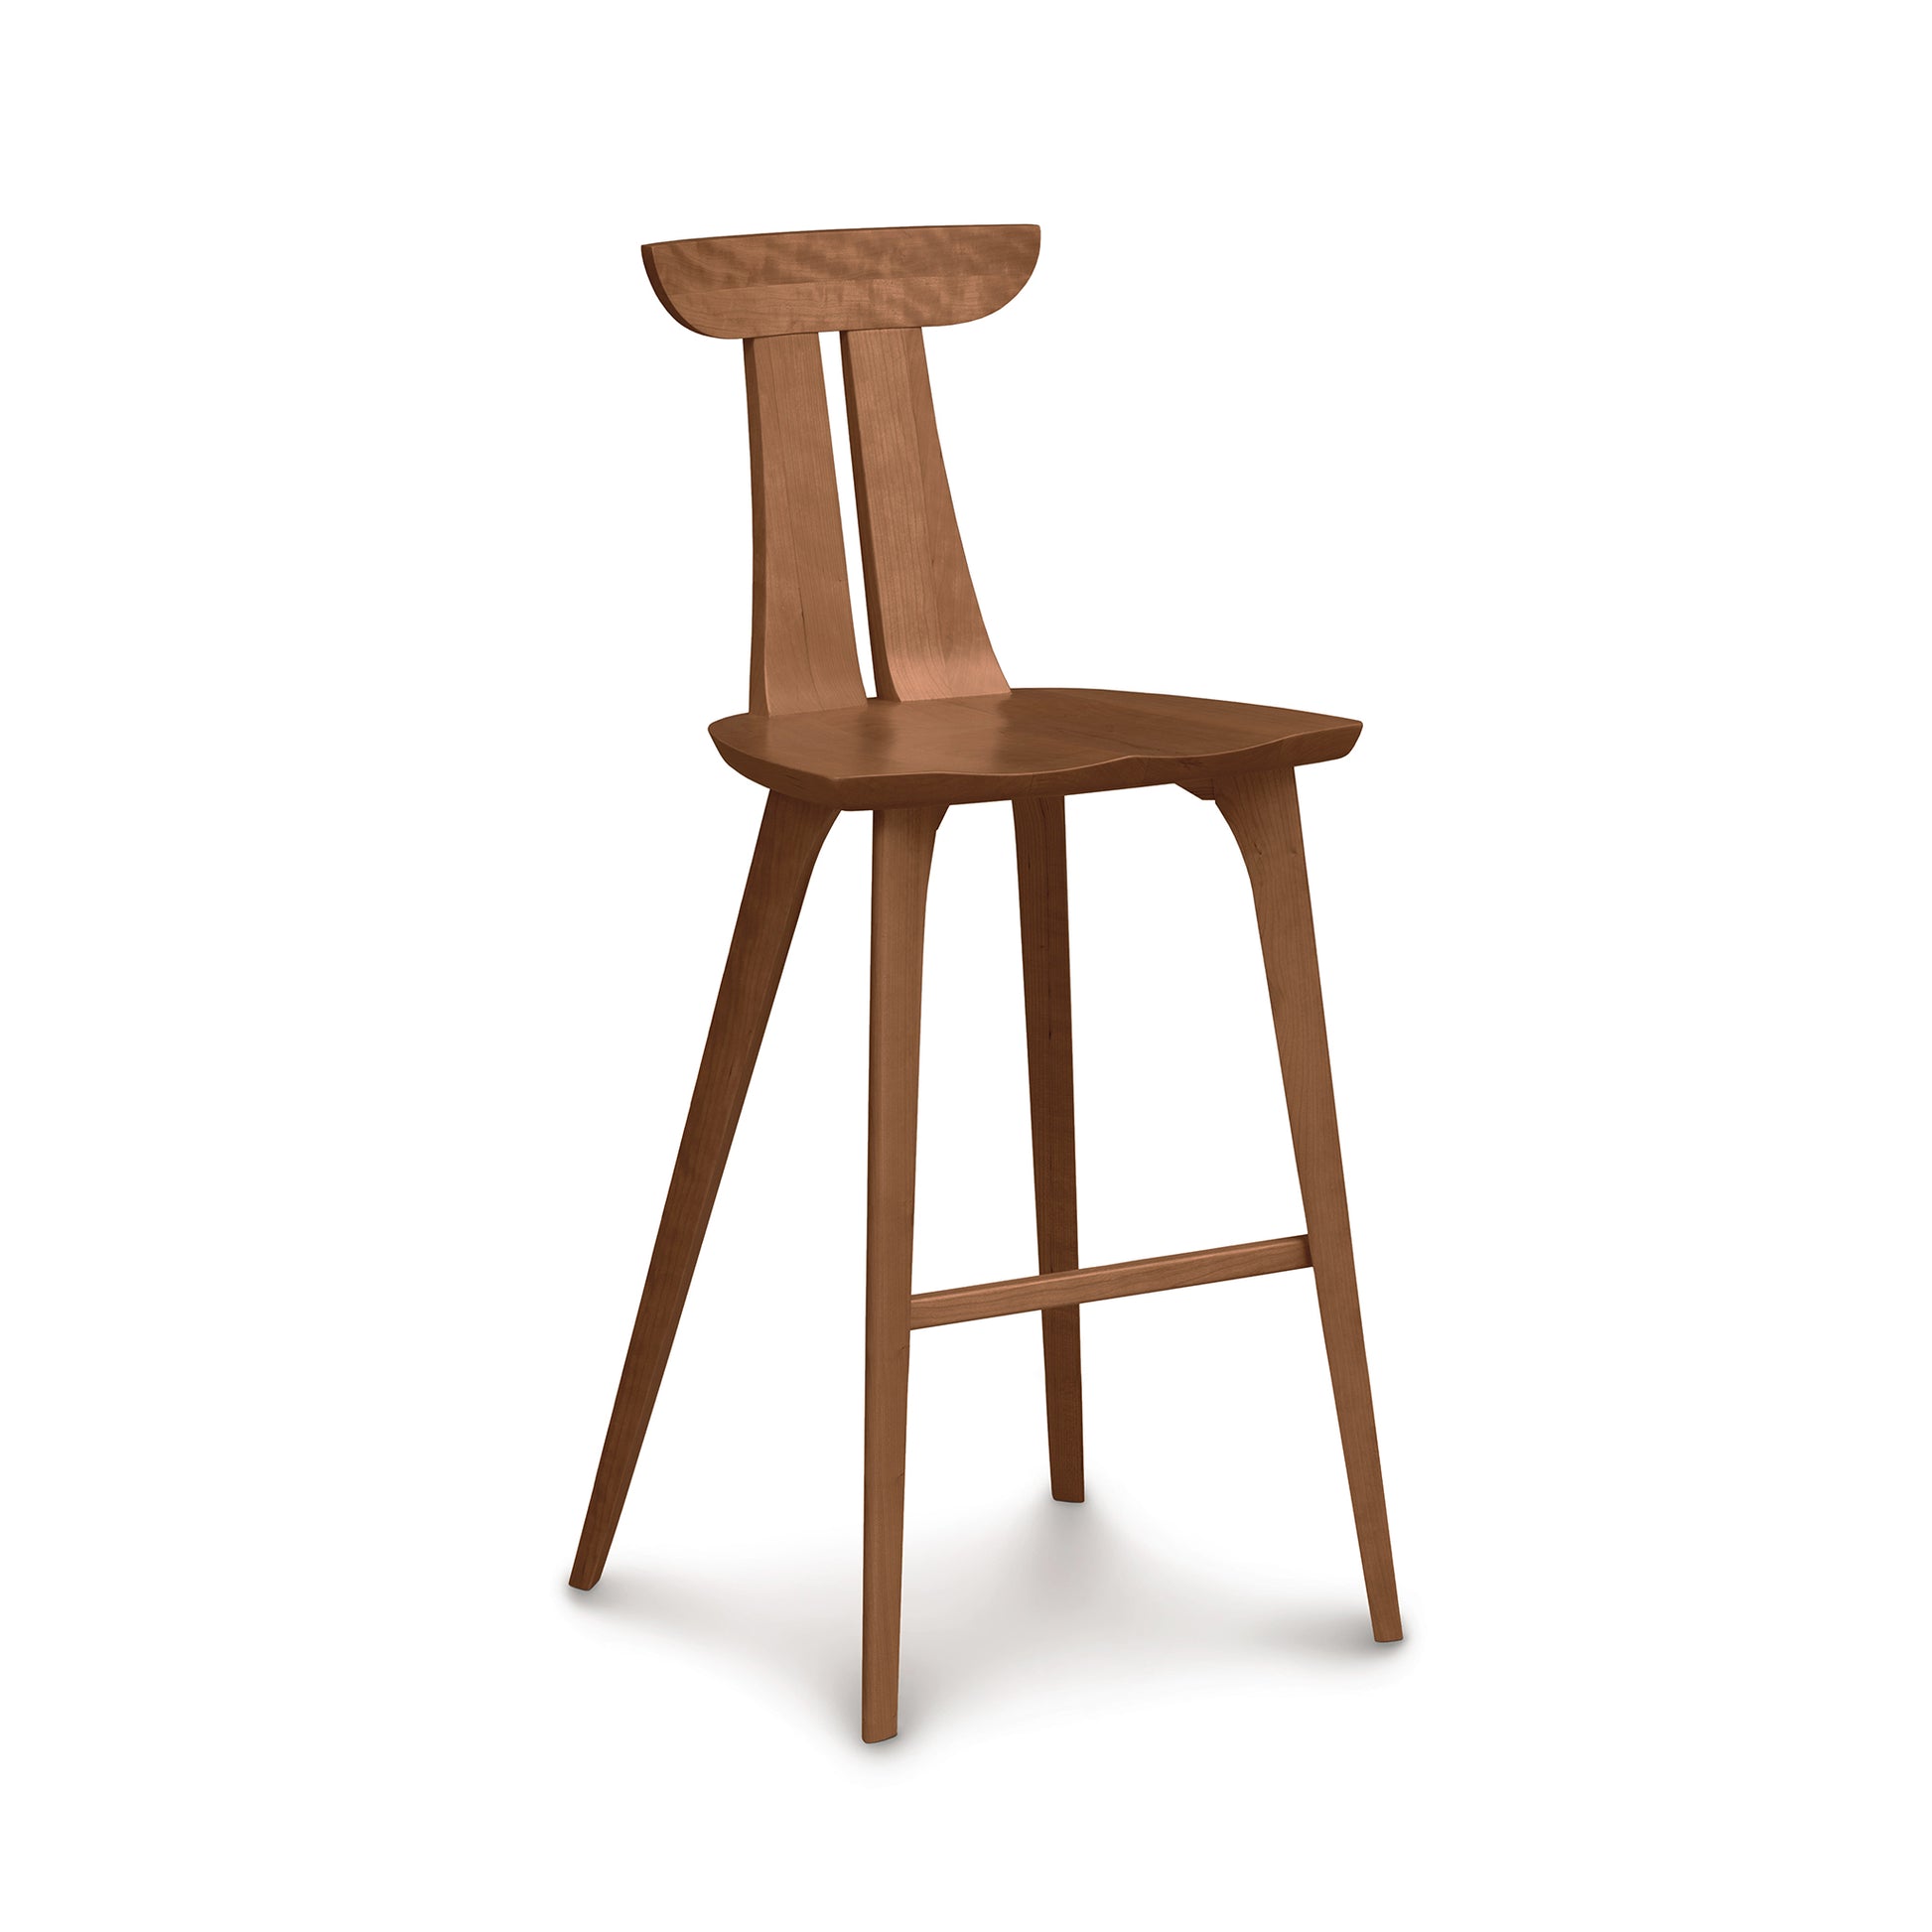 A Copeland Furniture Estelle Bar Stool, crafted from solid American hardwood, isolated on a white background.